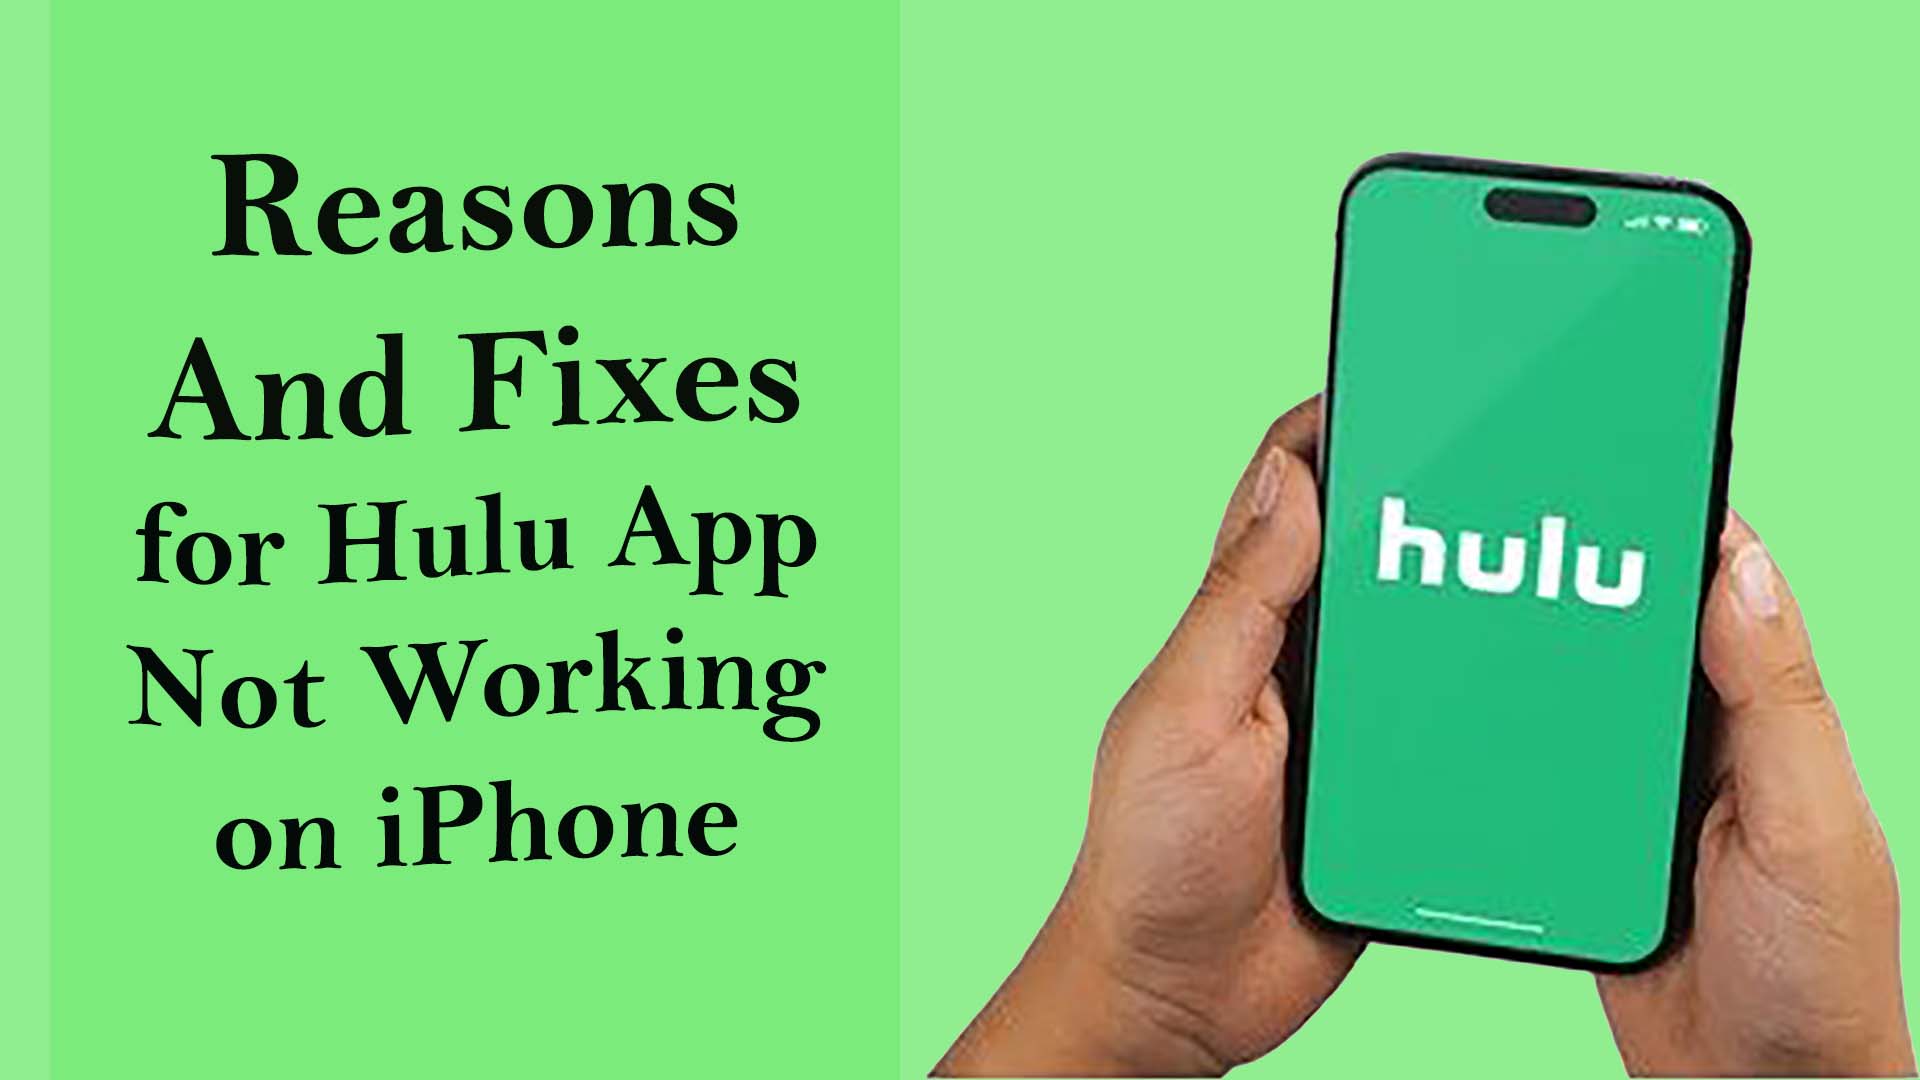 Why is Hulu App not working on iPhone? And How to Fix it?